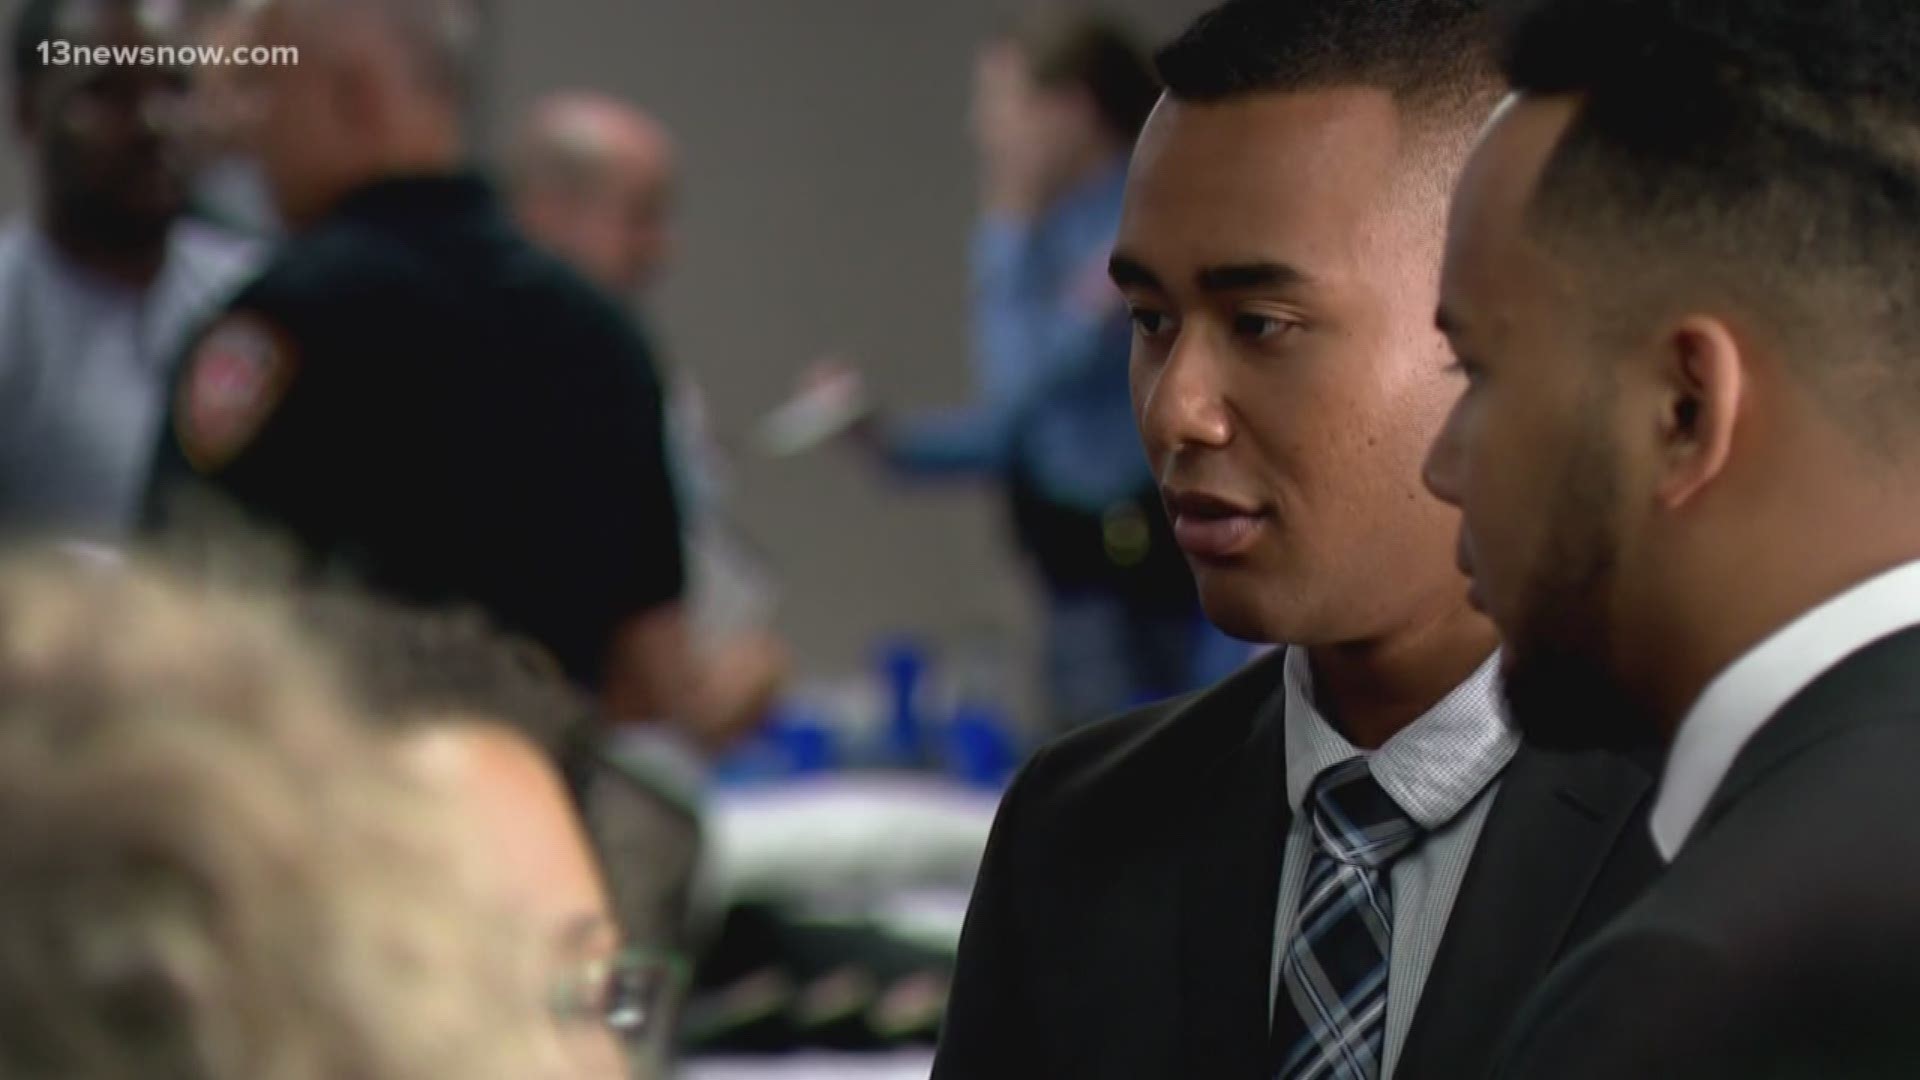 The largest law enforcement hiring event was held in Virginia Beach.